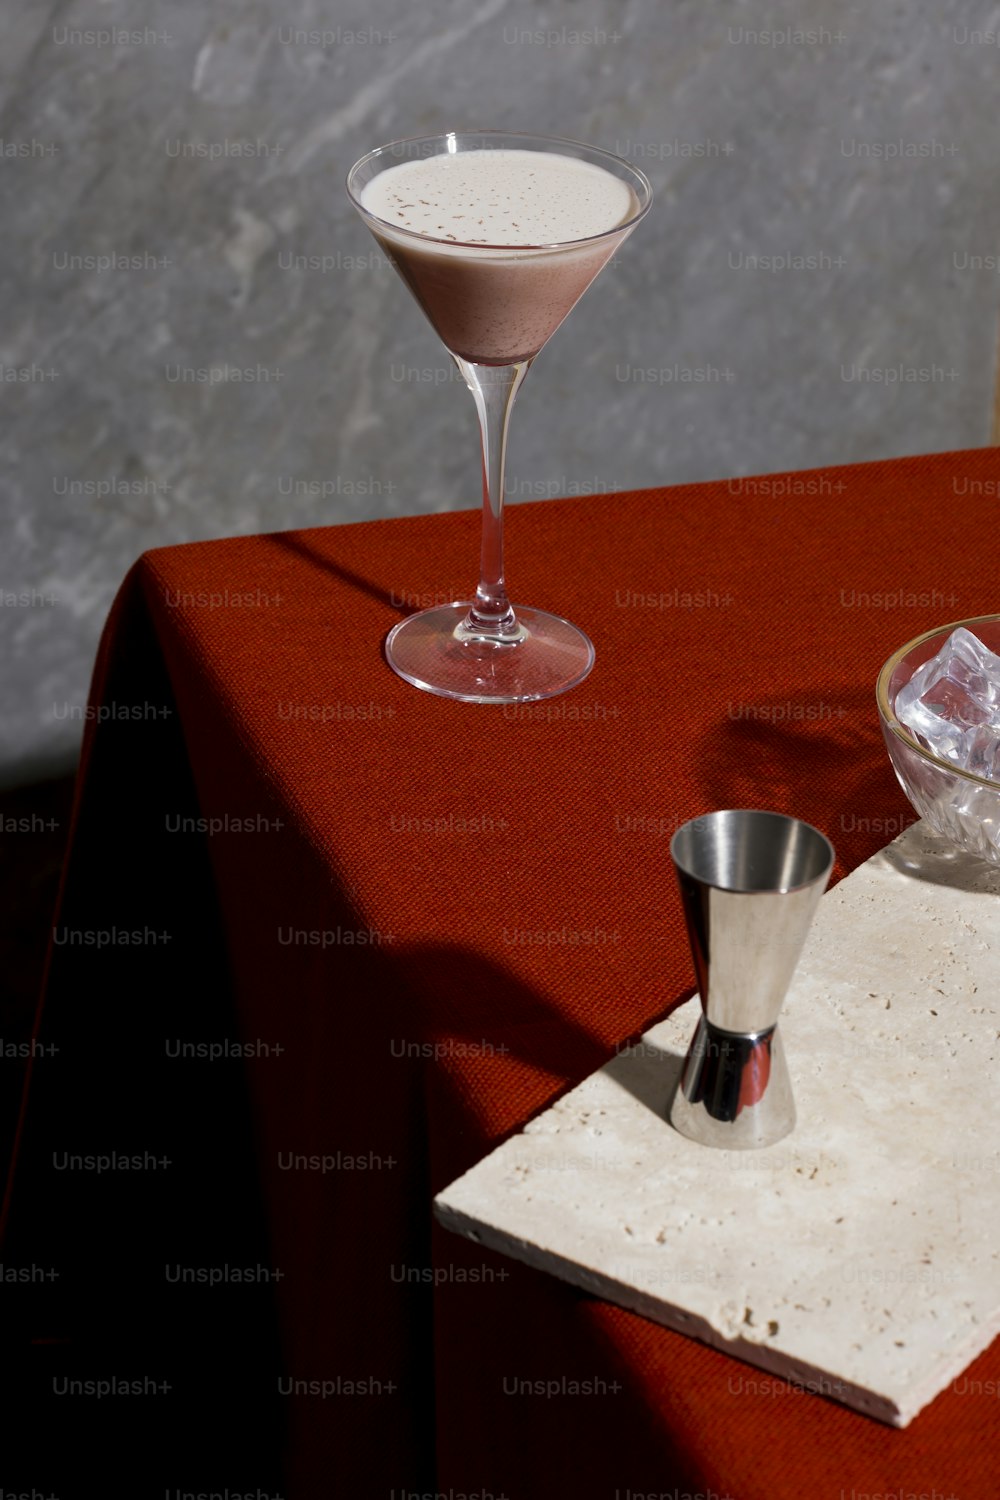 Alexander, an after dinner cocktail with gin or cognac, white creme de cacao, fresh cream and  grated nutmeg